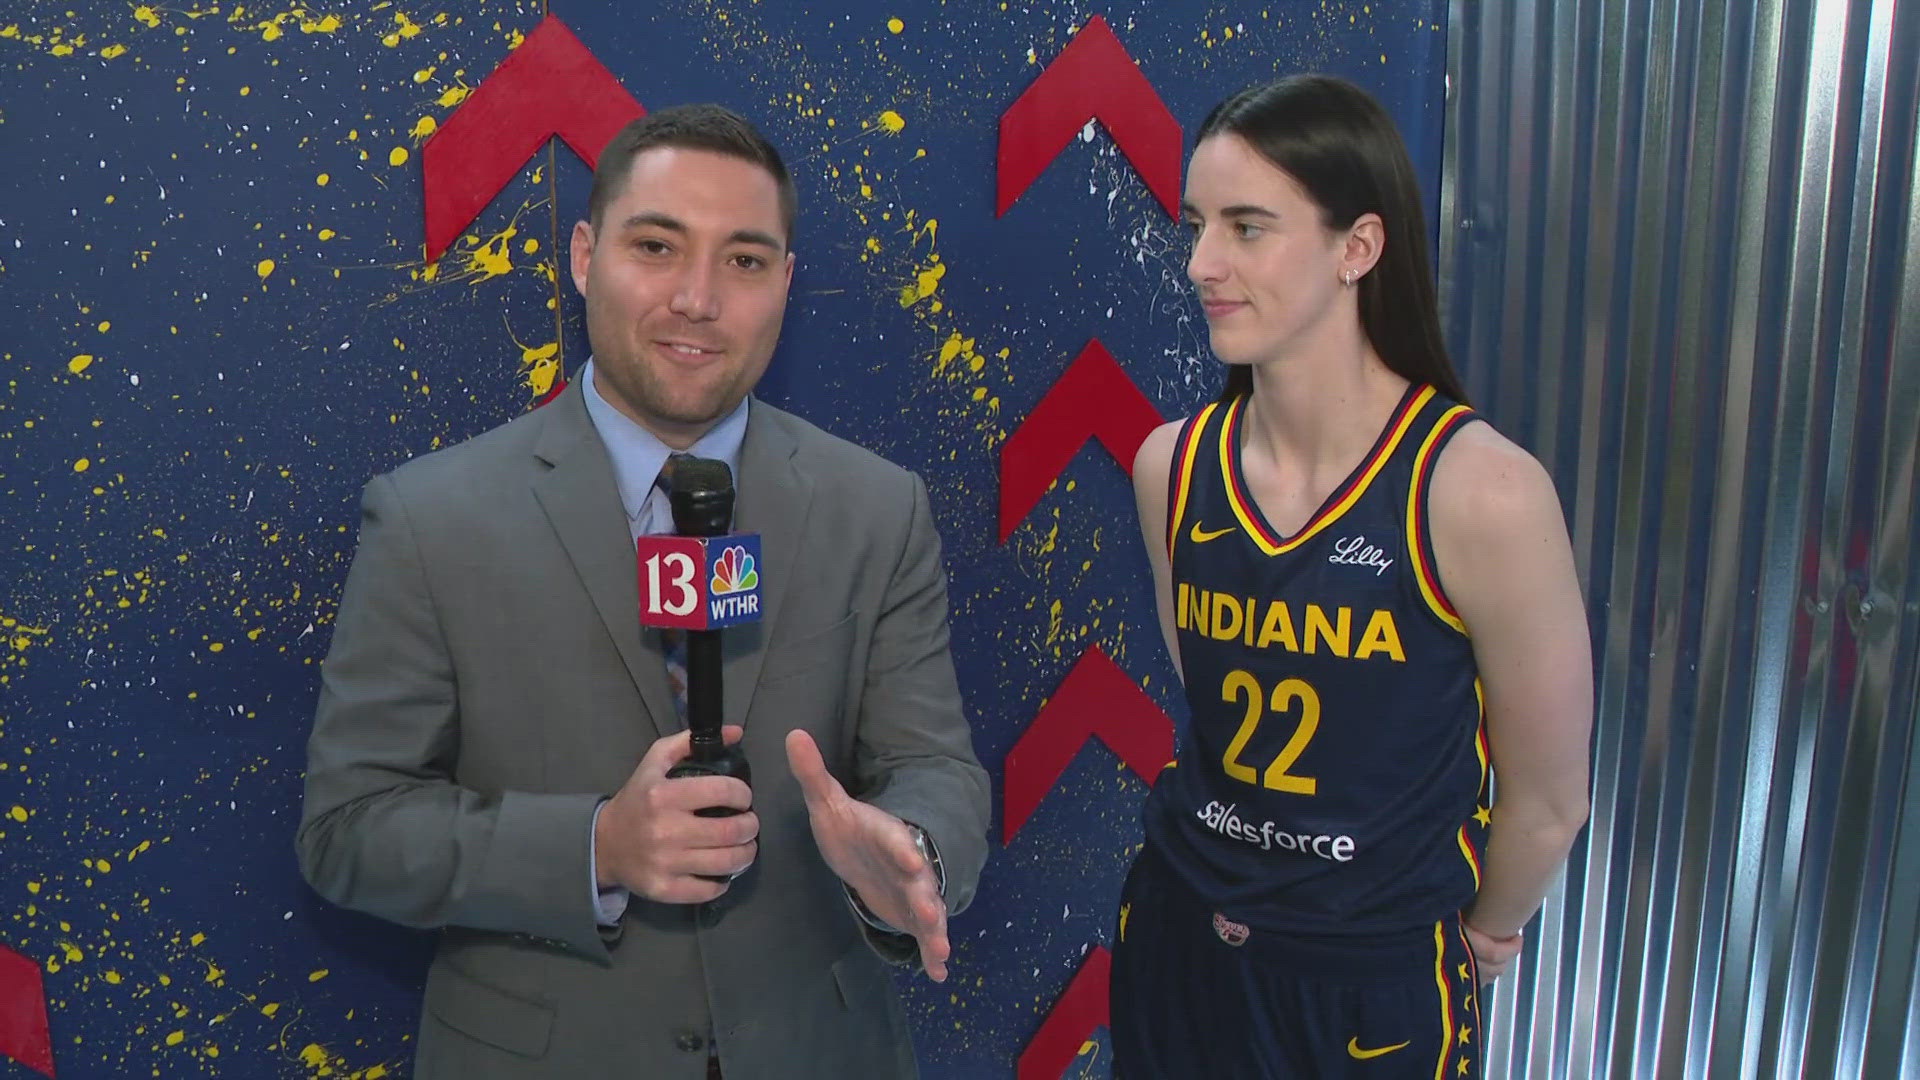 Watch 13Sports reporter Dominic Miranda's exclusive interview with the Indiana Fever's Caitlin Clark.